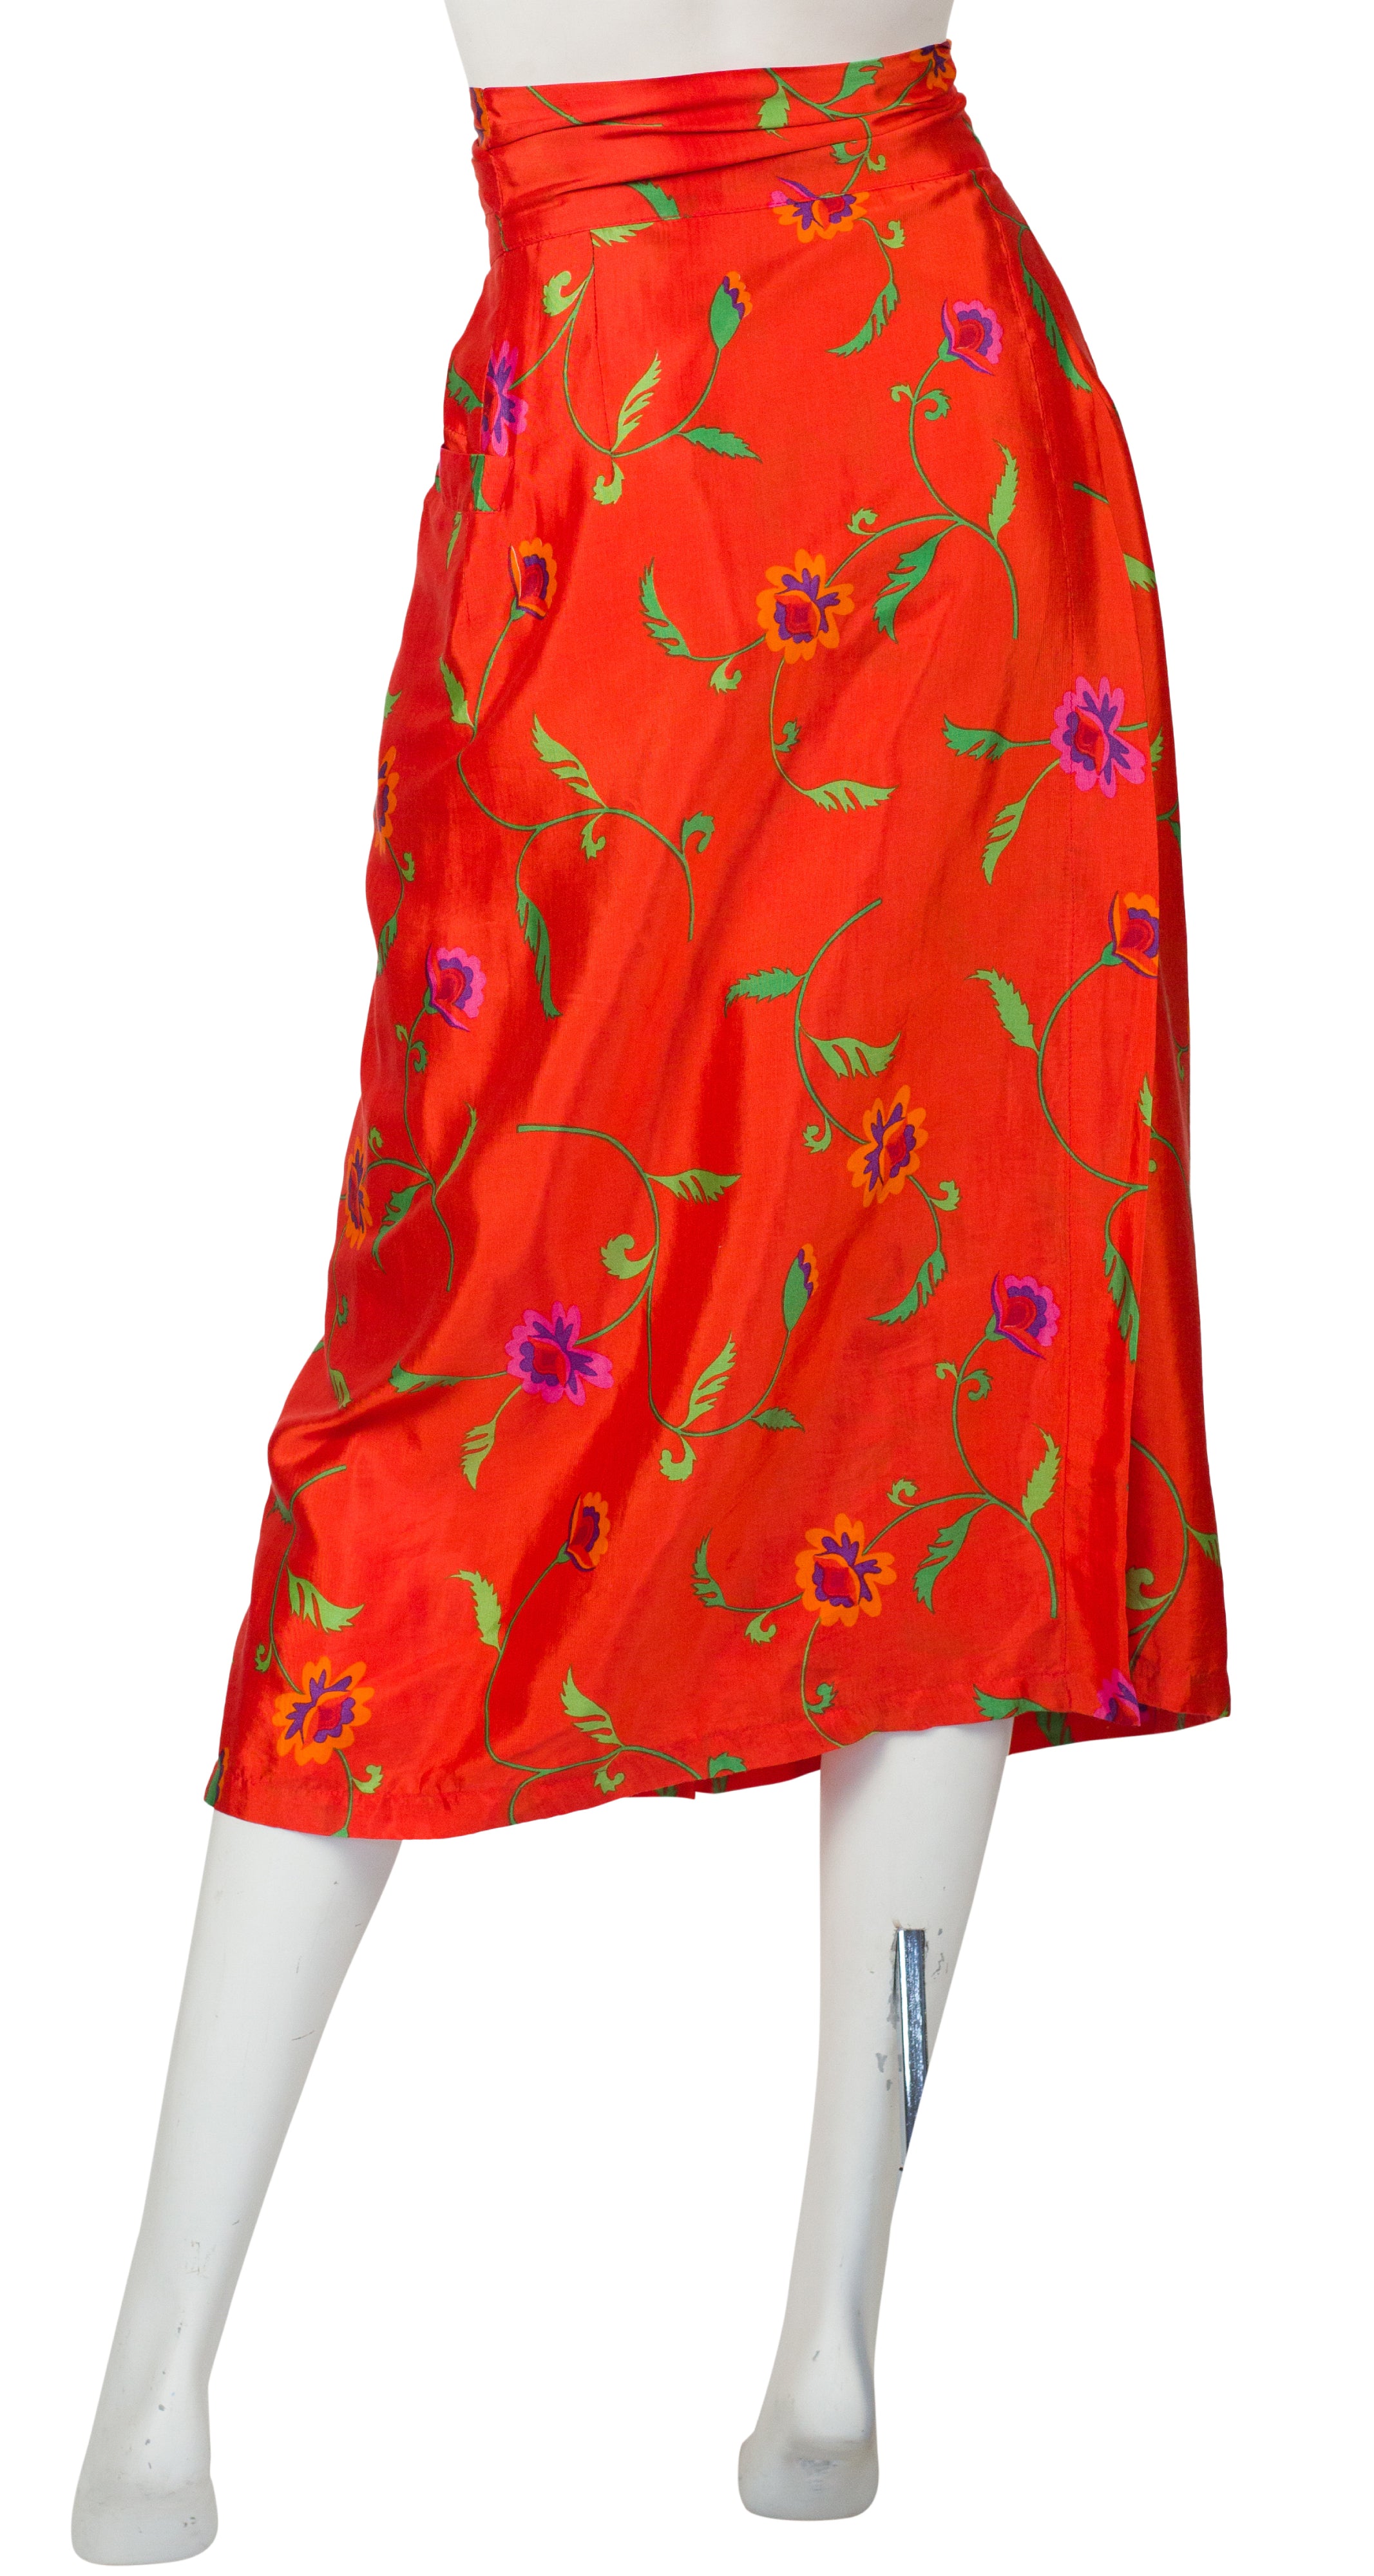 1978 S/S Documented Floral Blood Orange Rayon Wrap Skirt